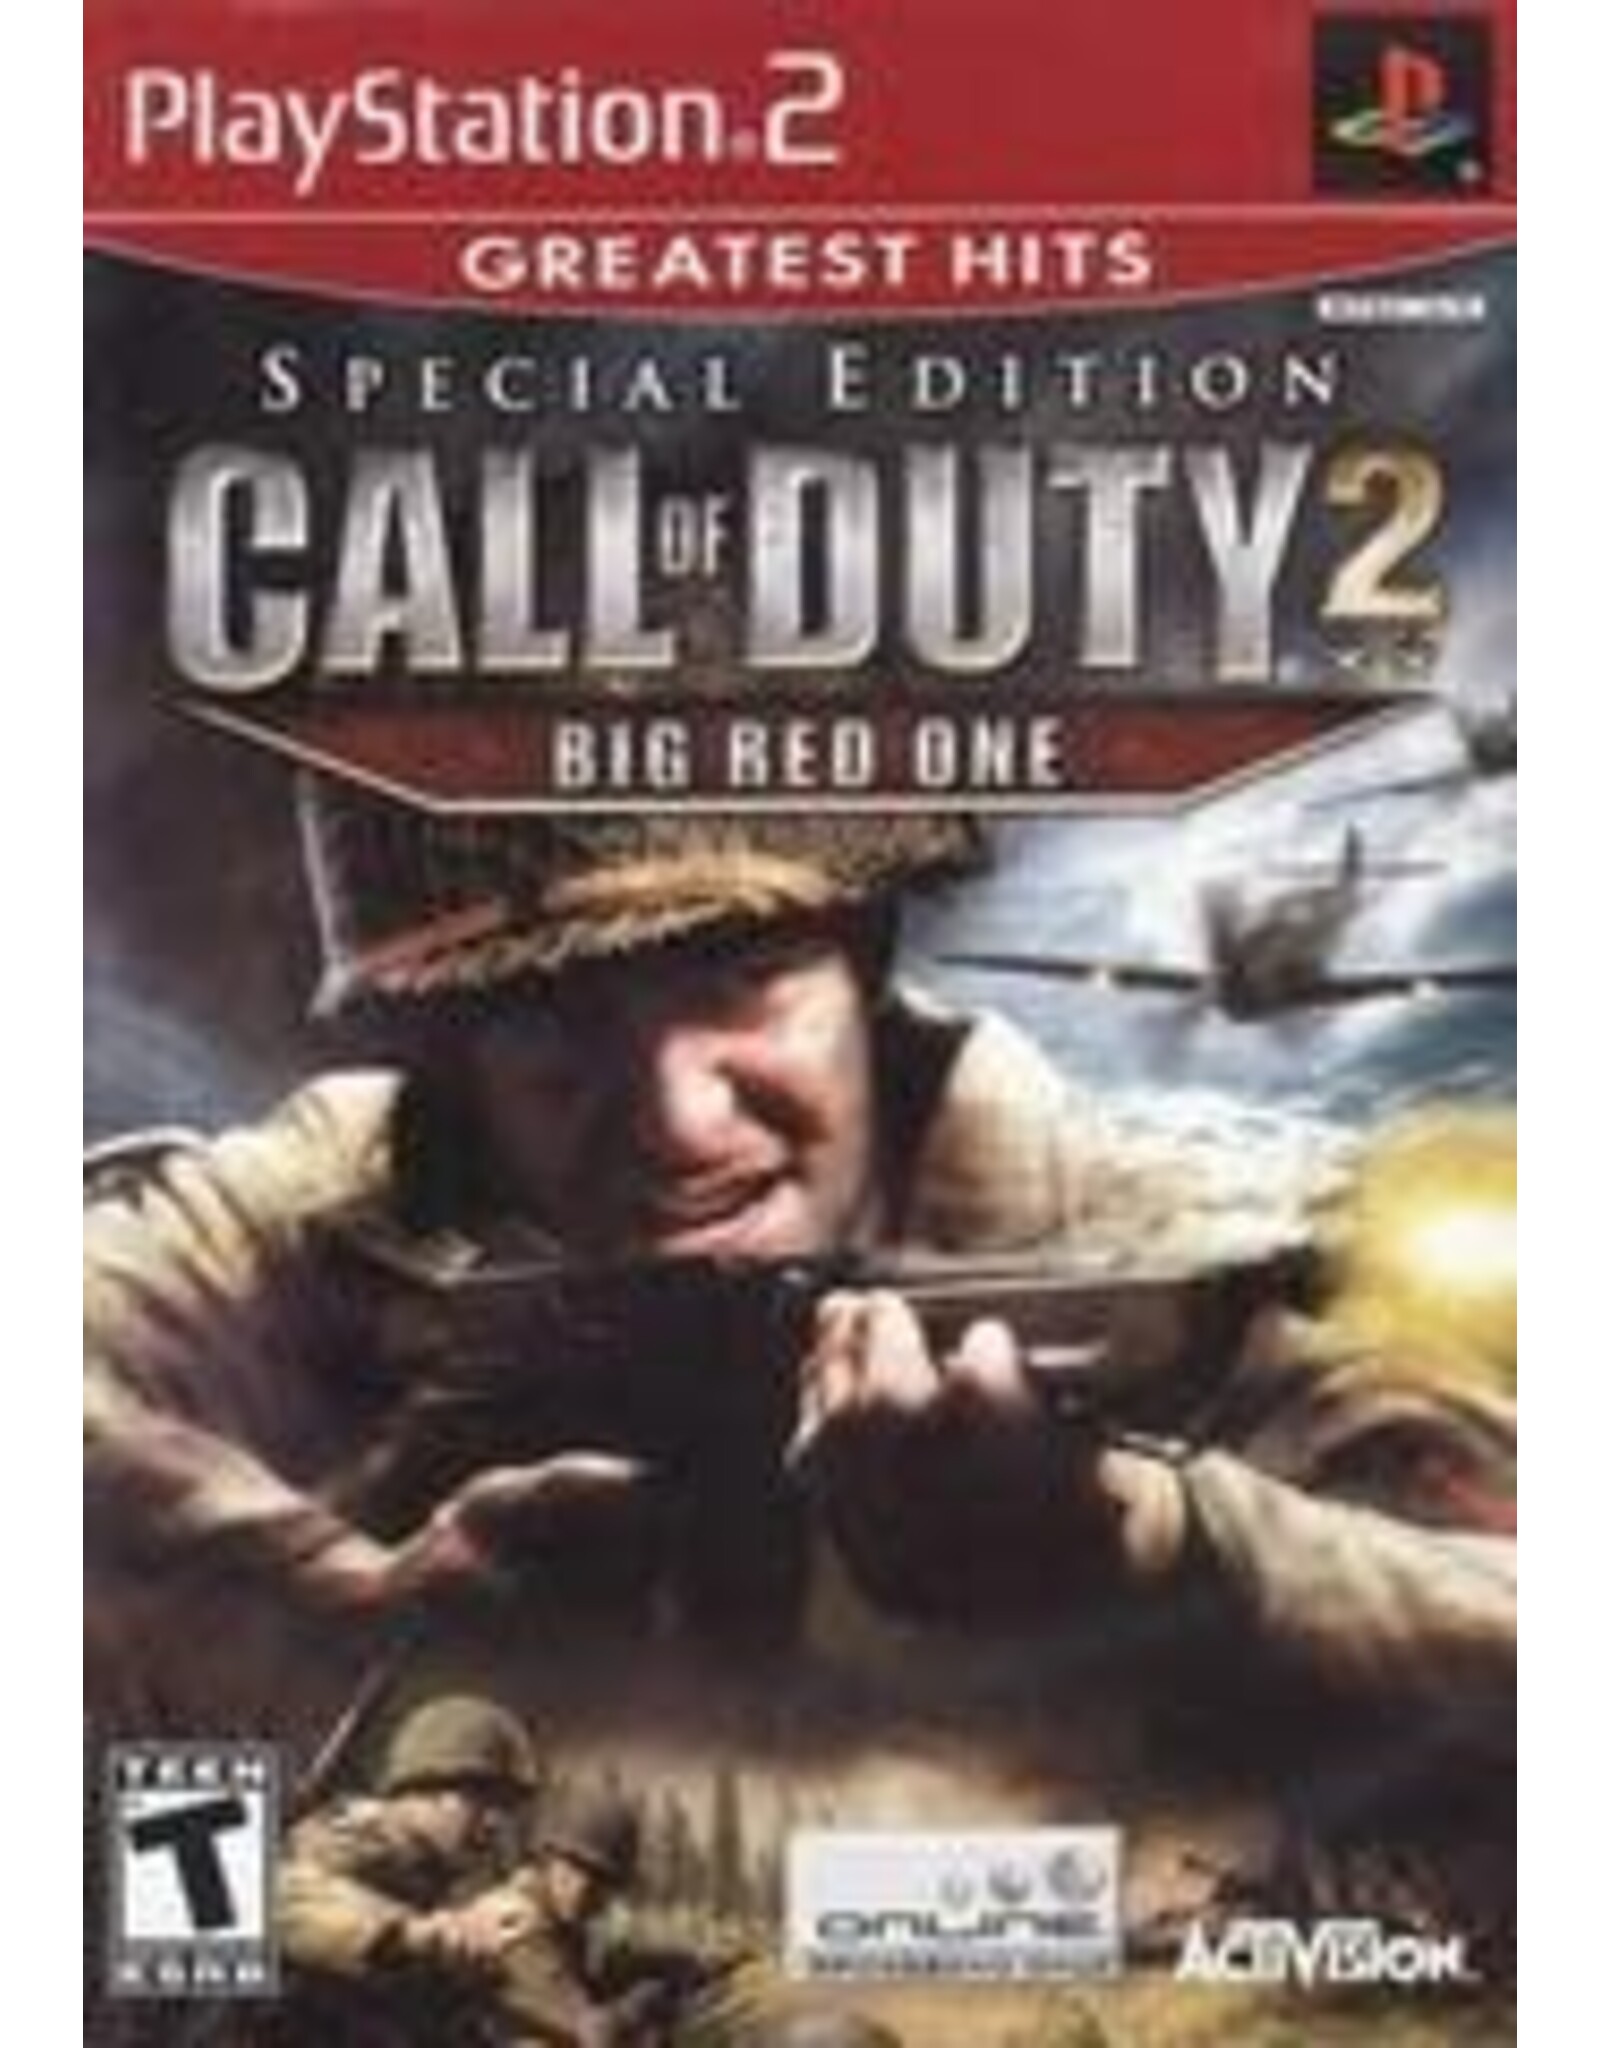 Playstation 2 Call of Duty 2 Big Red One Special Edition (Greatest Hits, No Manual)